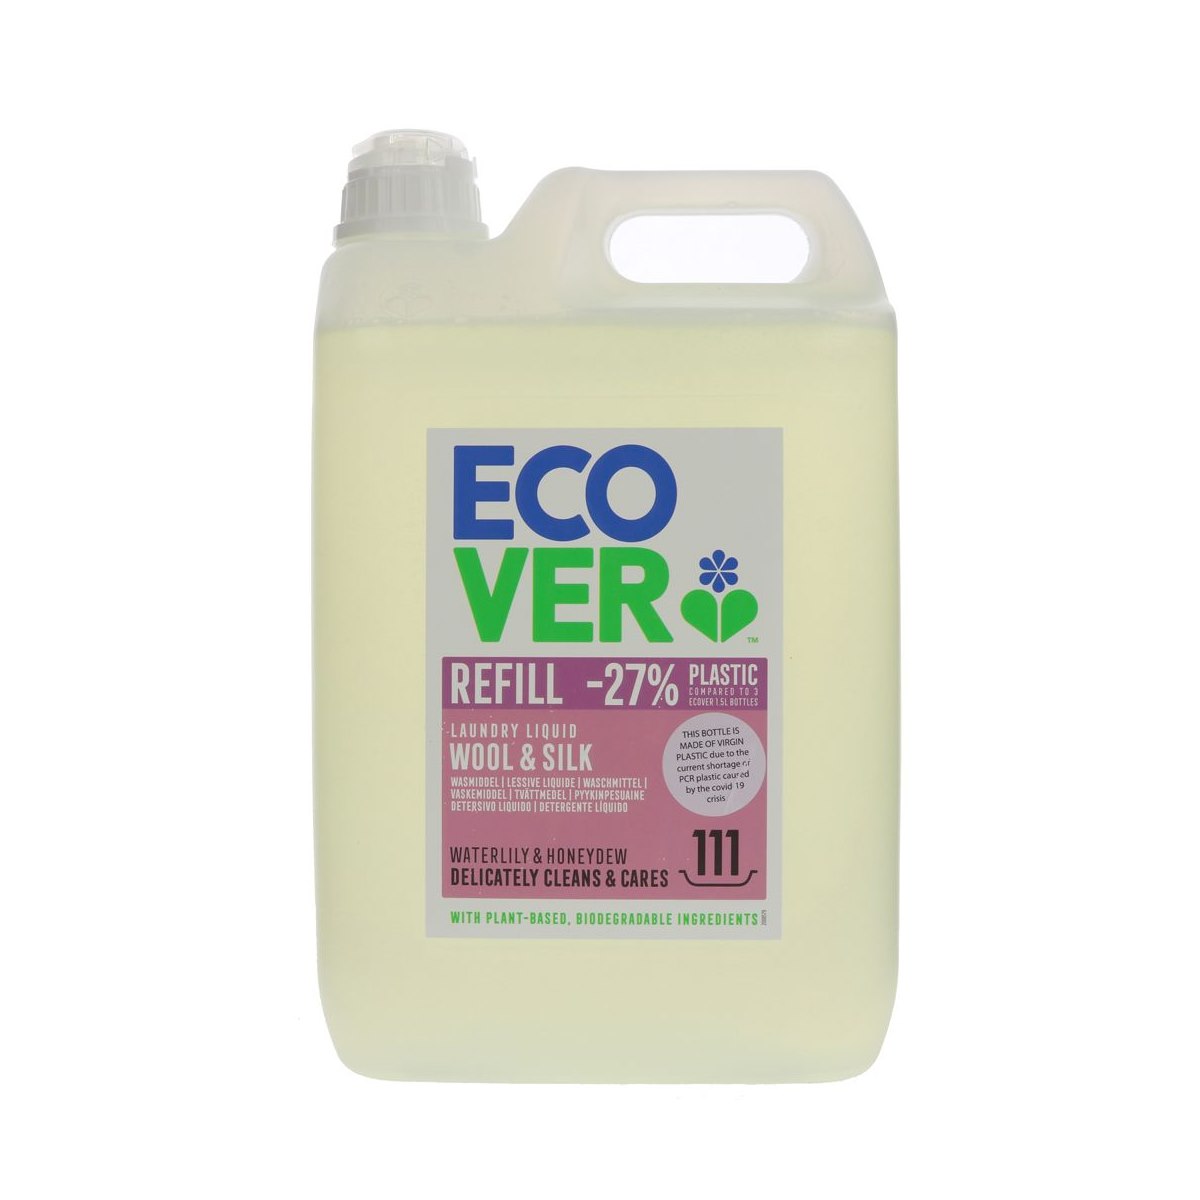 Ecover Delicate Laundry Liquid Wool and Silk Waterlily and Honeydew 5 Litre